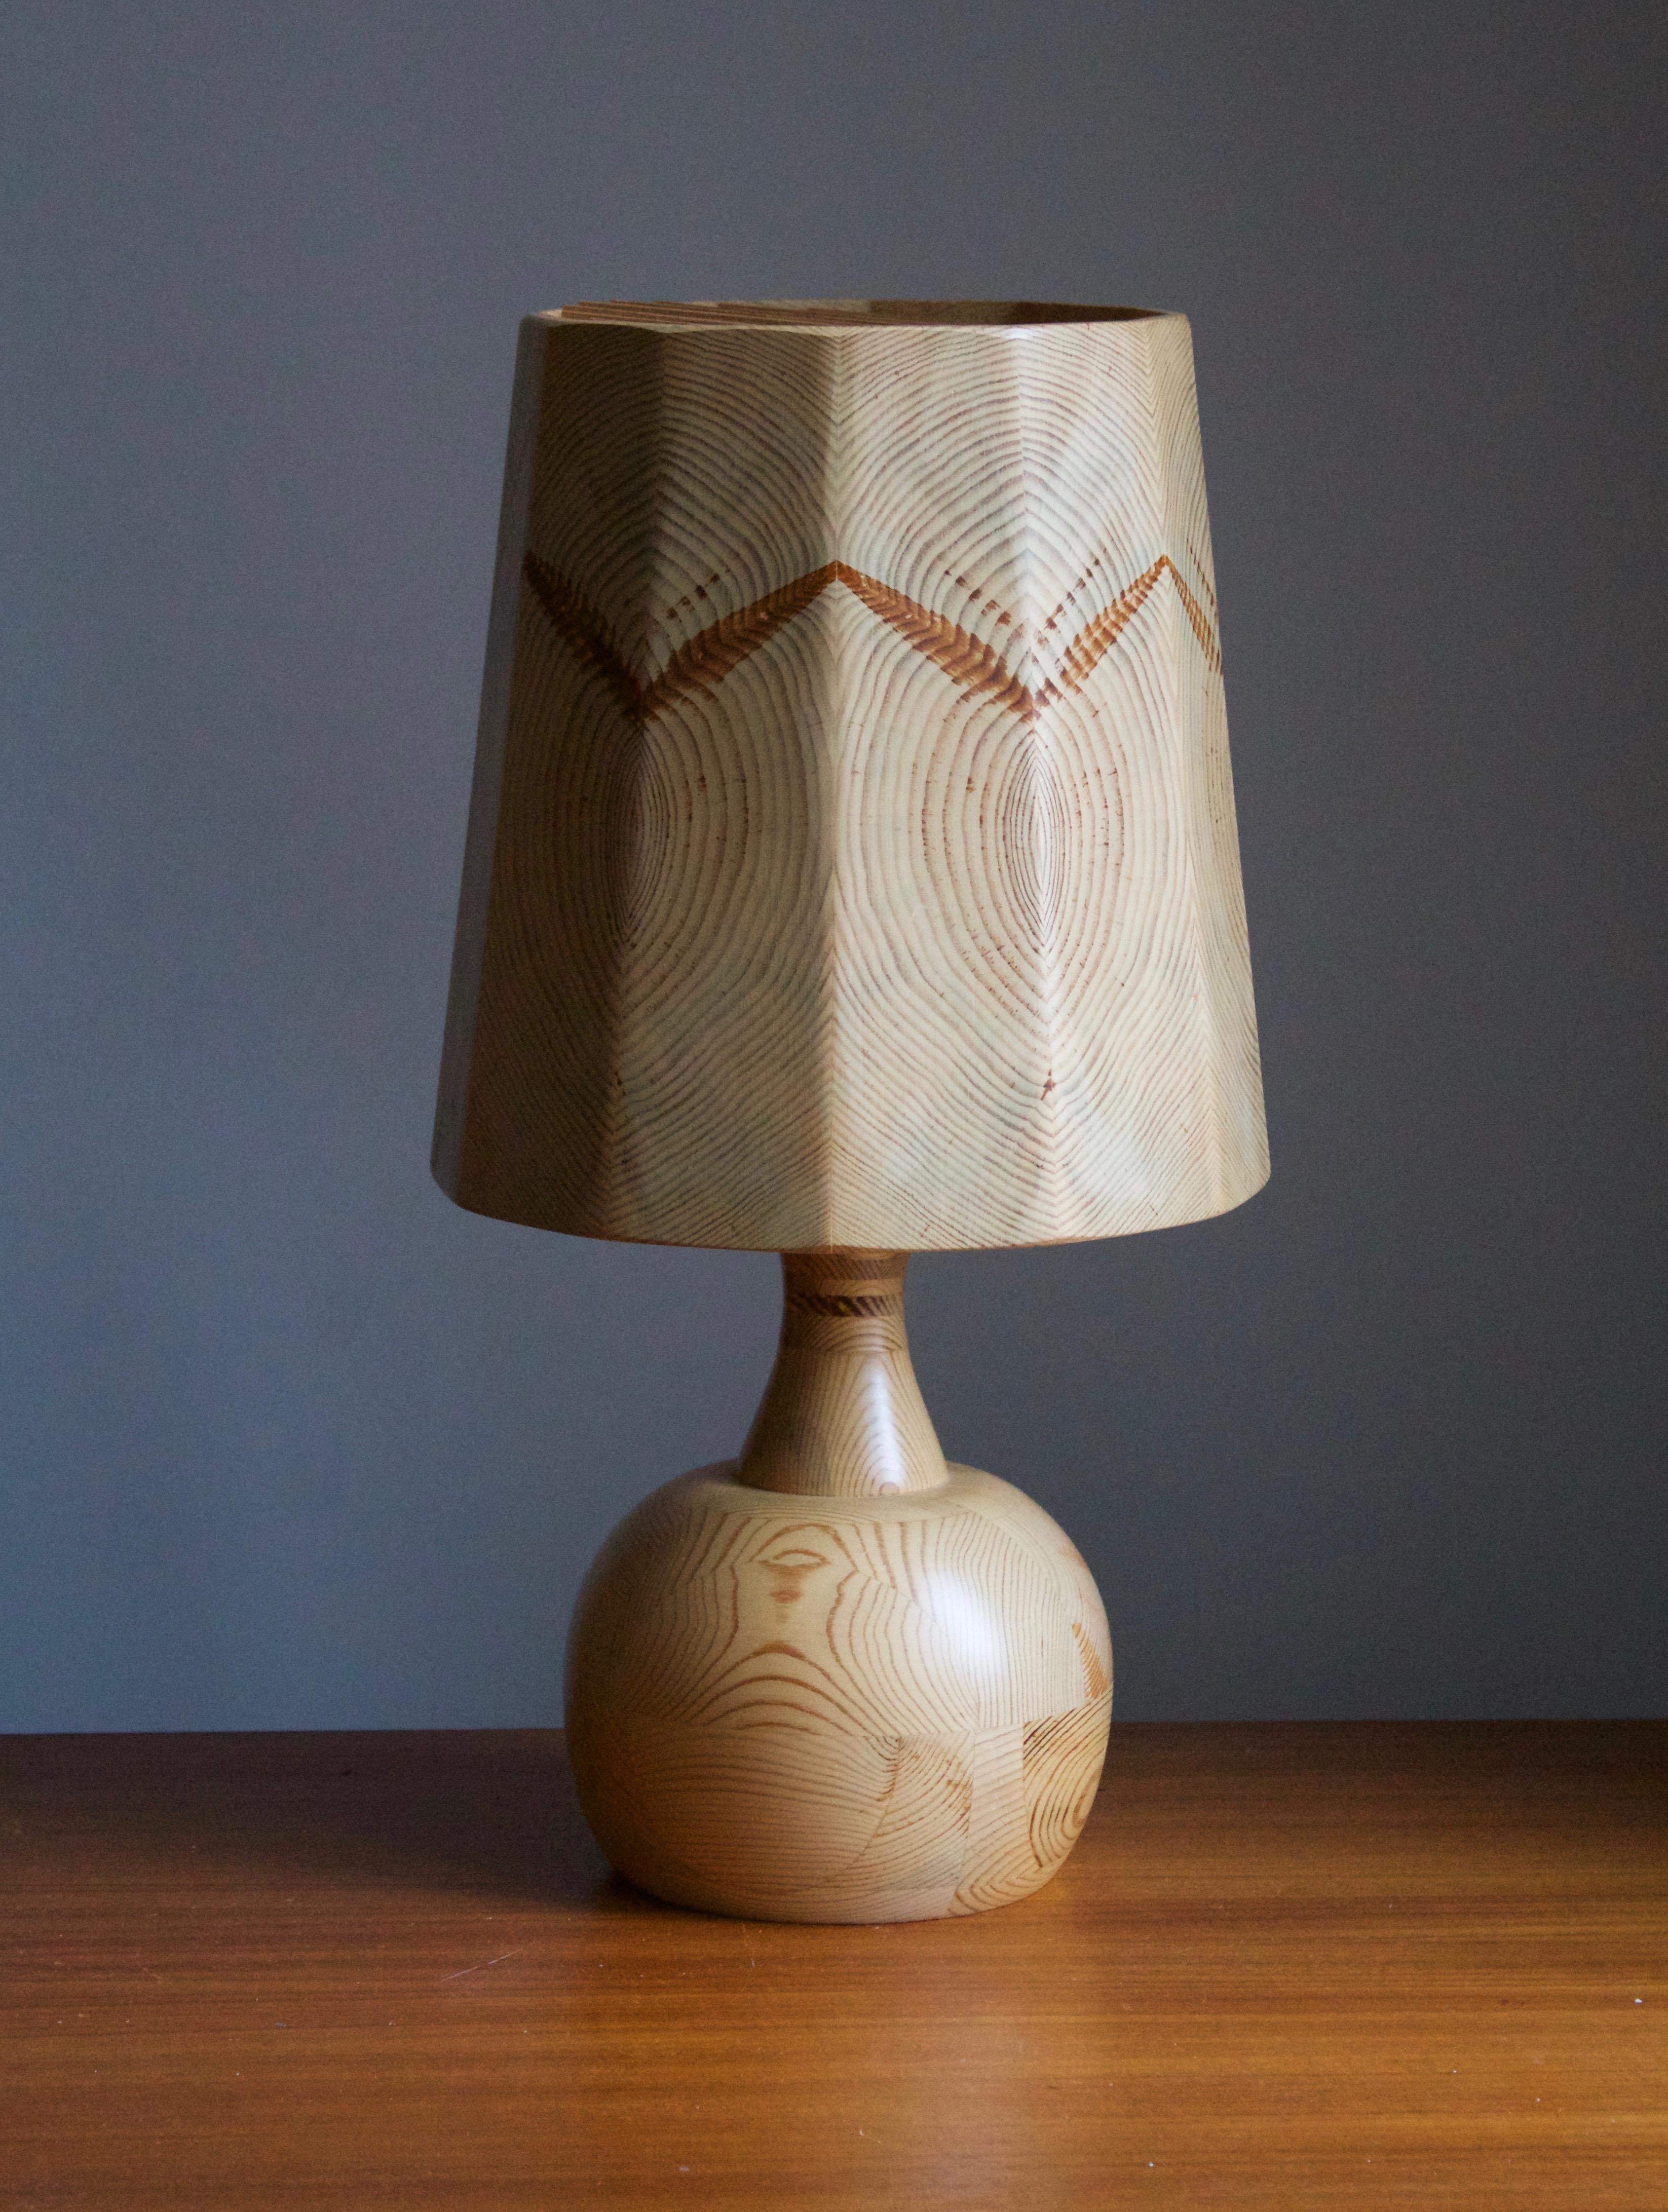 A sizable table lamp. Designed and produced by Leif Wikner, Persåsen Kövra, Sweden, c. 1970s. Signed

In solid pine. Features a minimal form and simple ornamentation.